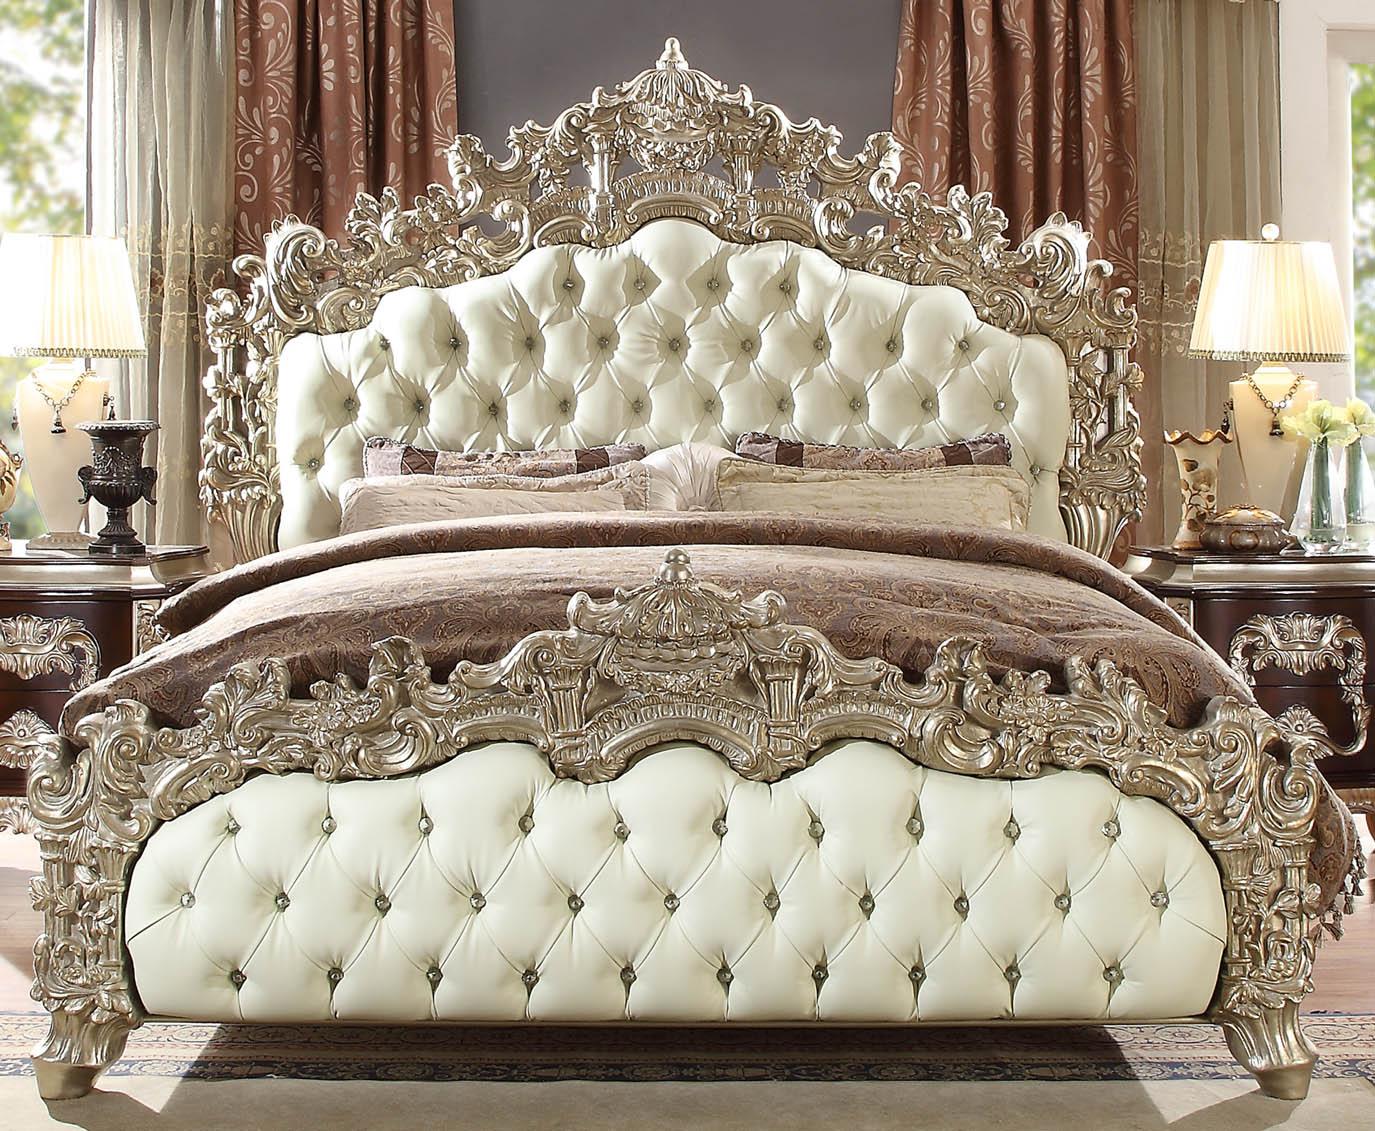 Traditional Panel Bed HD-8017 HD-8017 – CK BED in Antique Silver, Antique White Leather